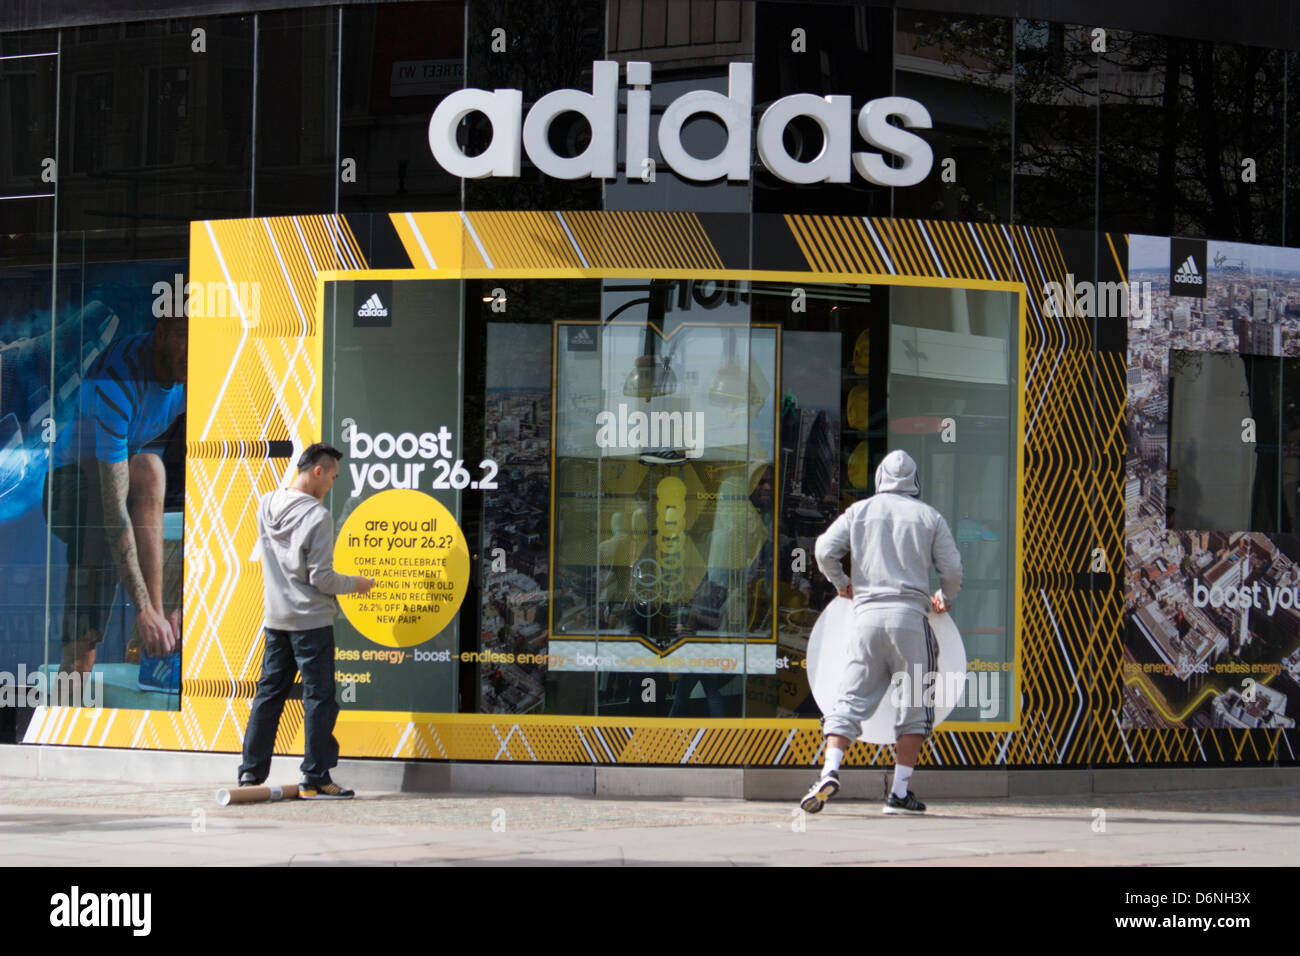 adidas new store opening oxford street